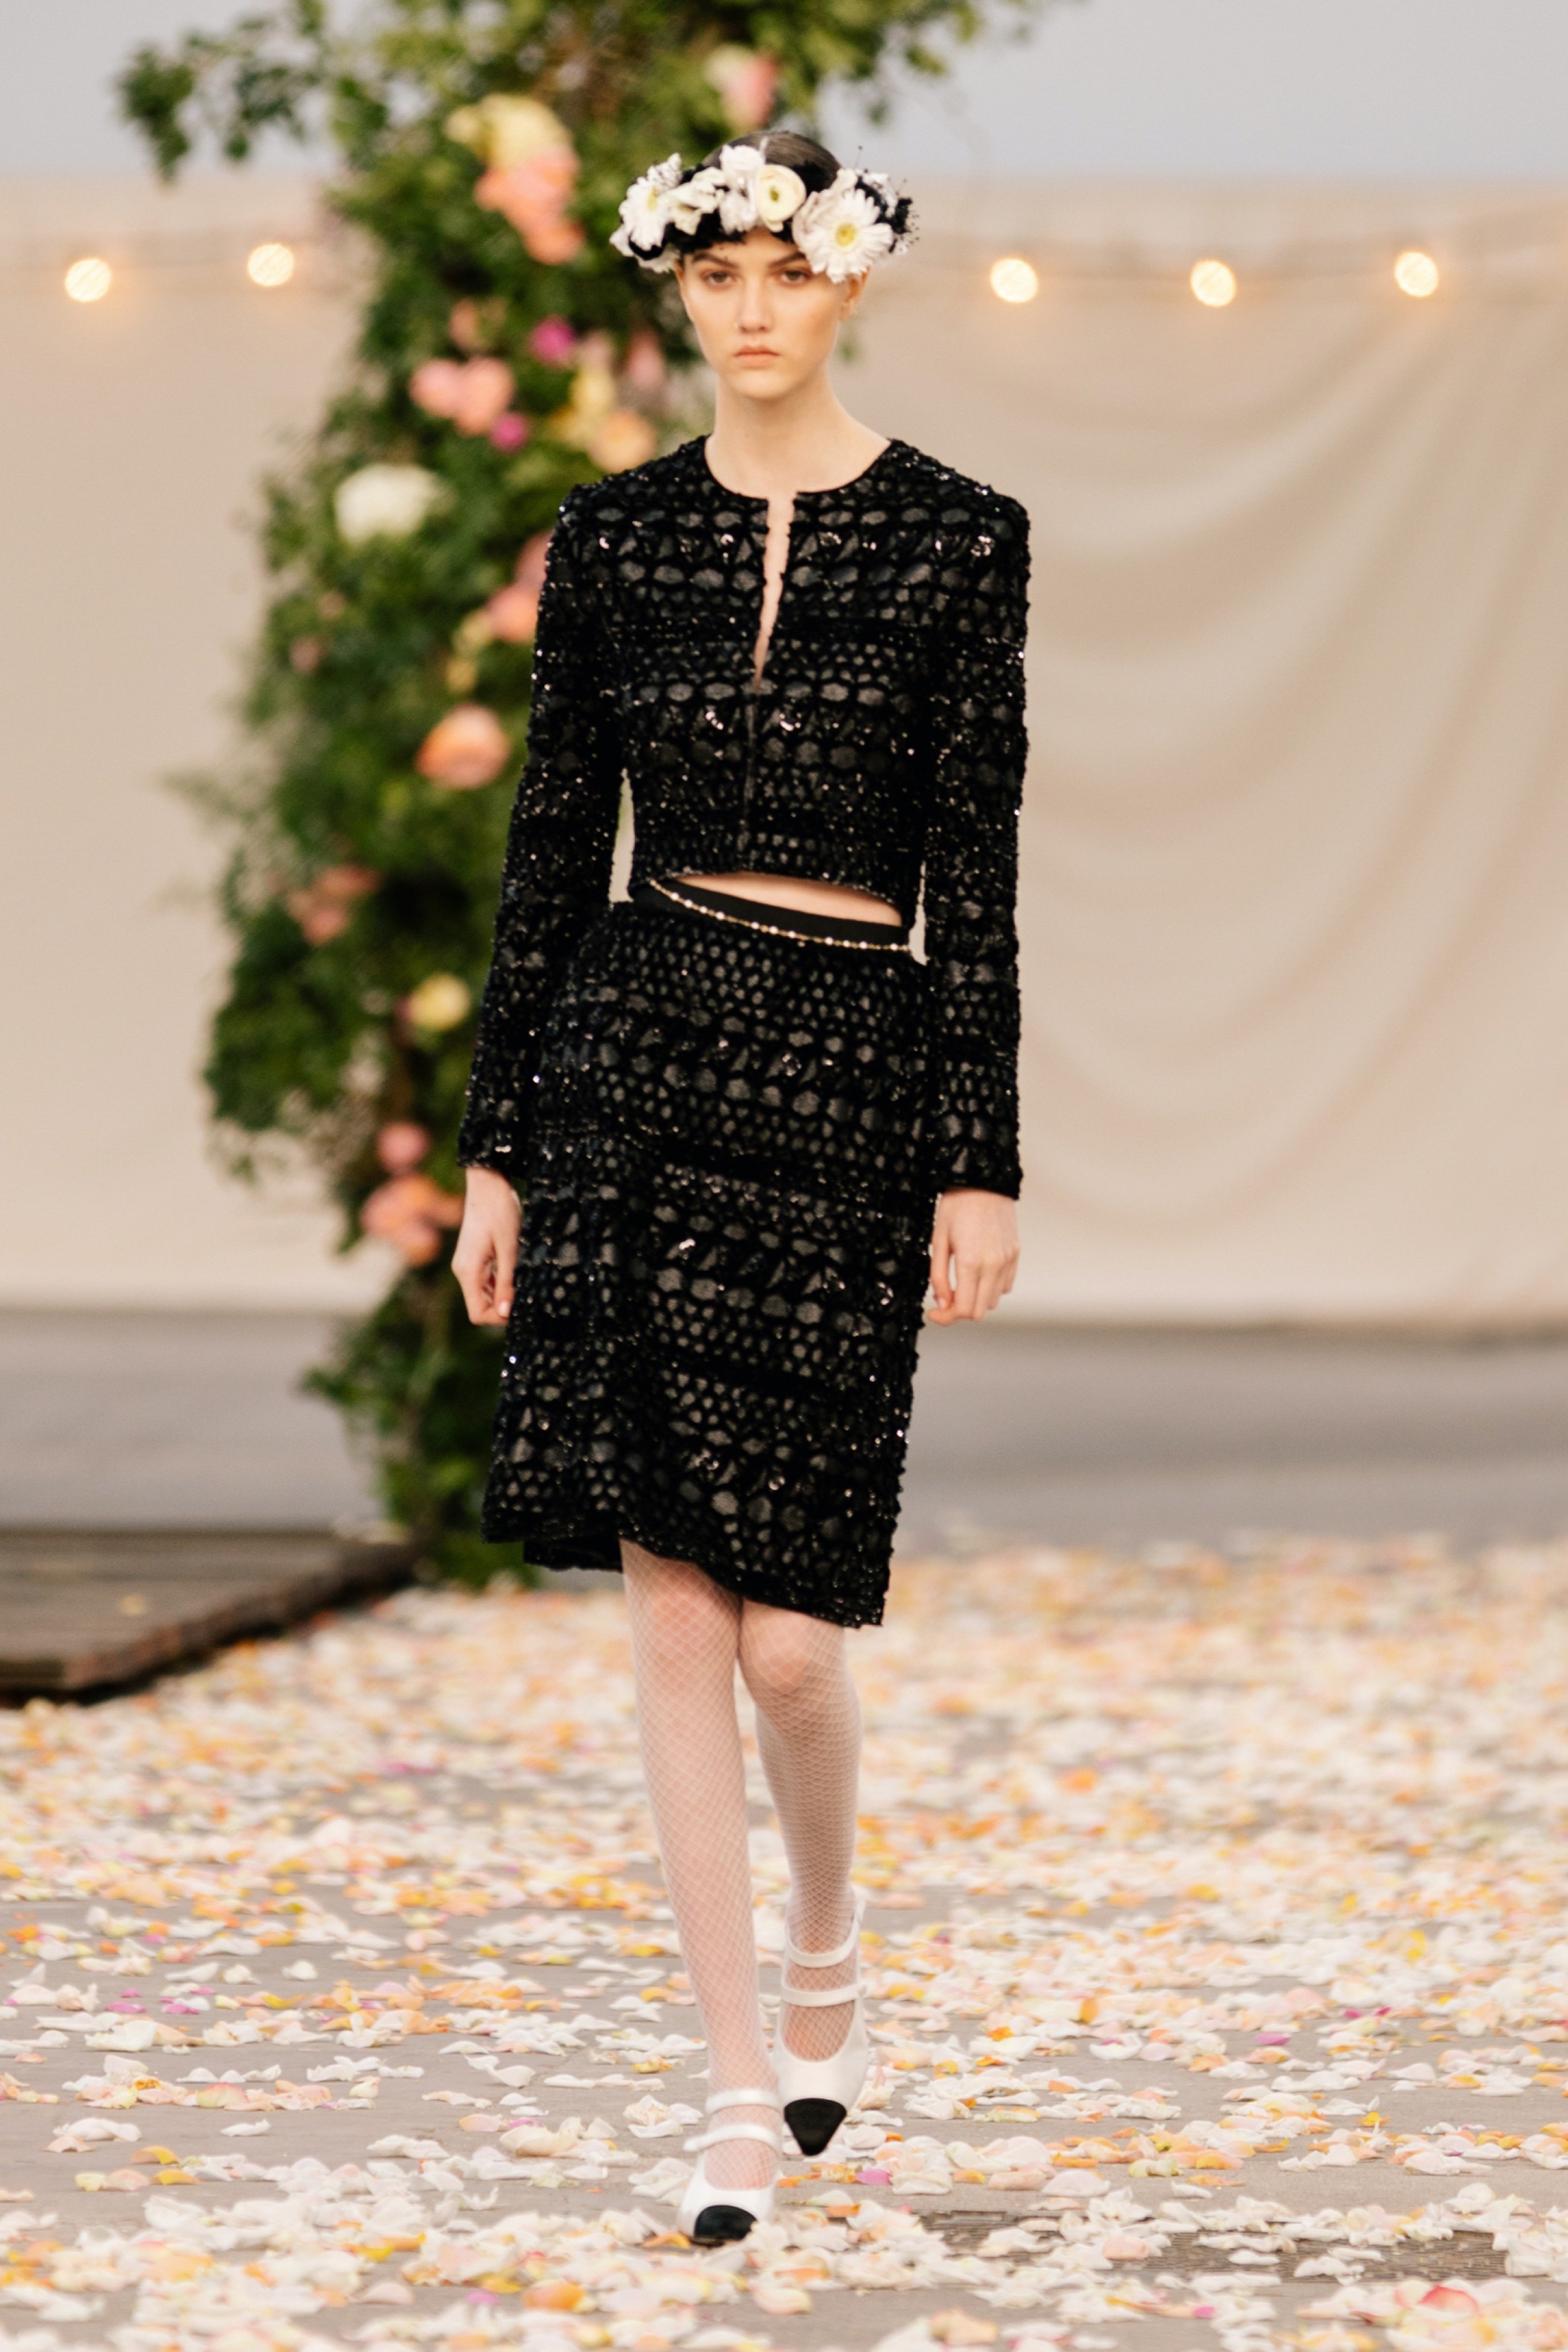 00017-Chanel-Couture-Spring-21.jpg